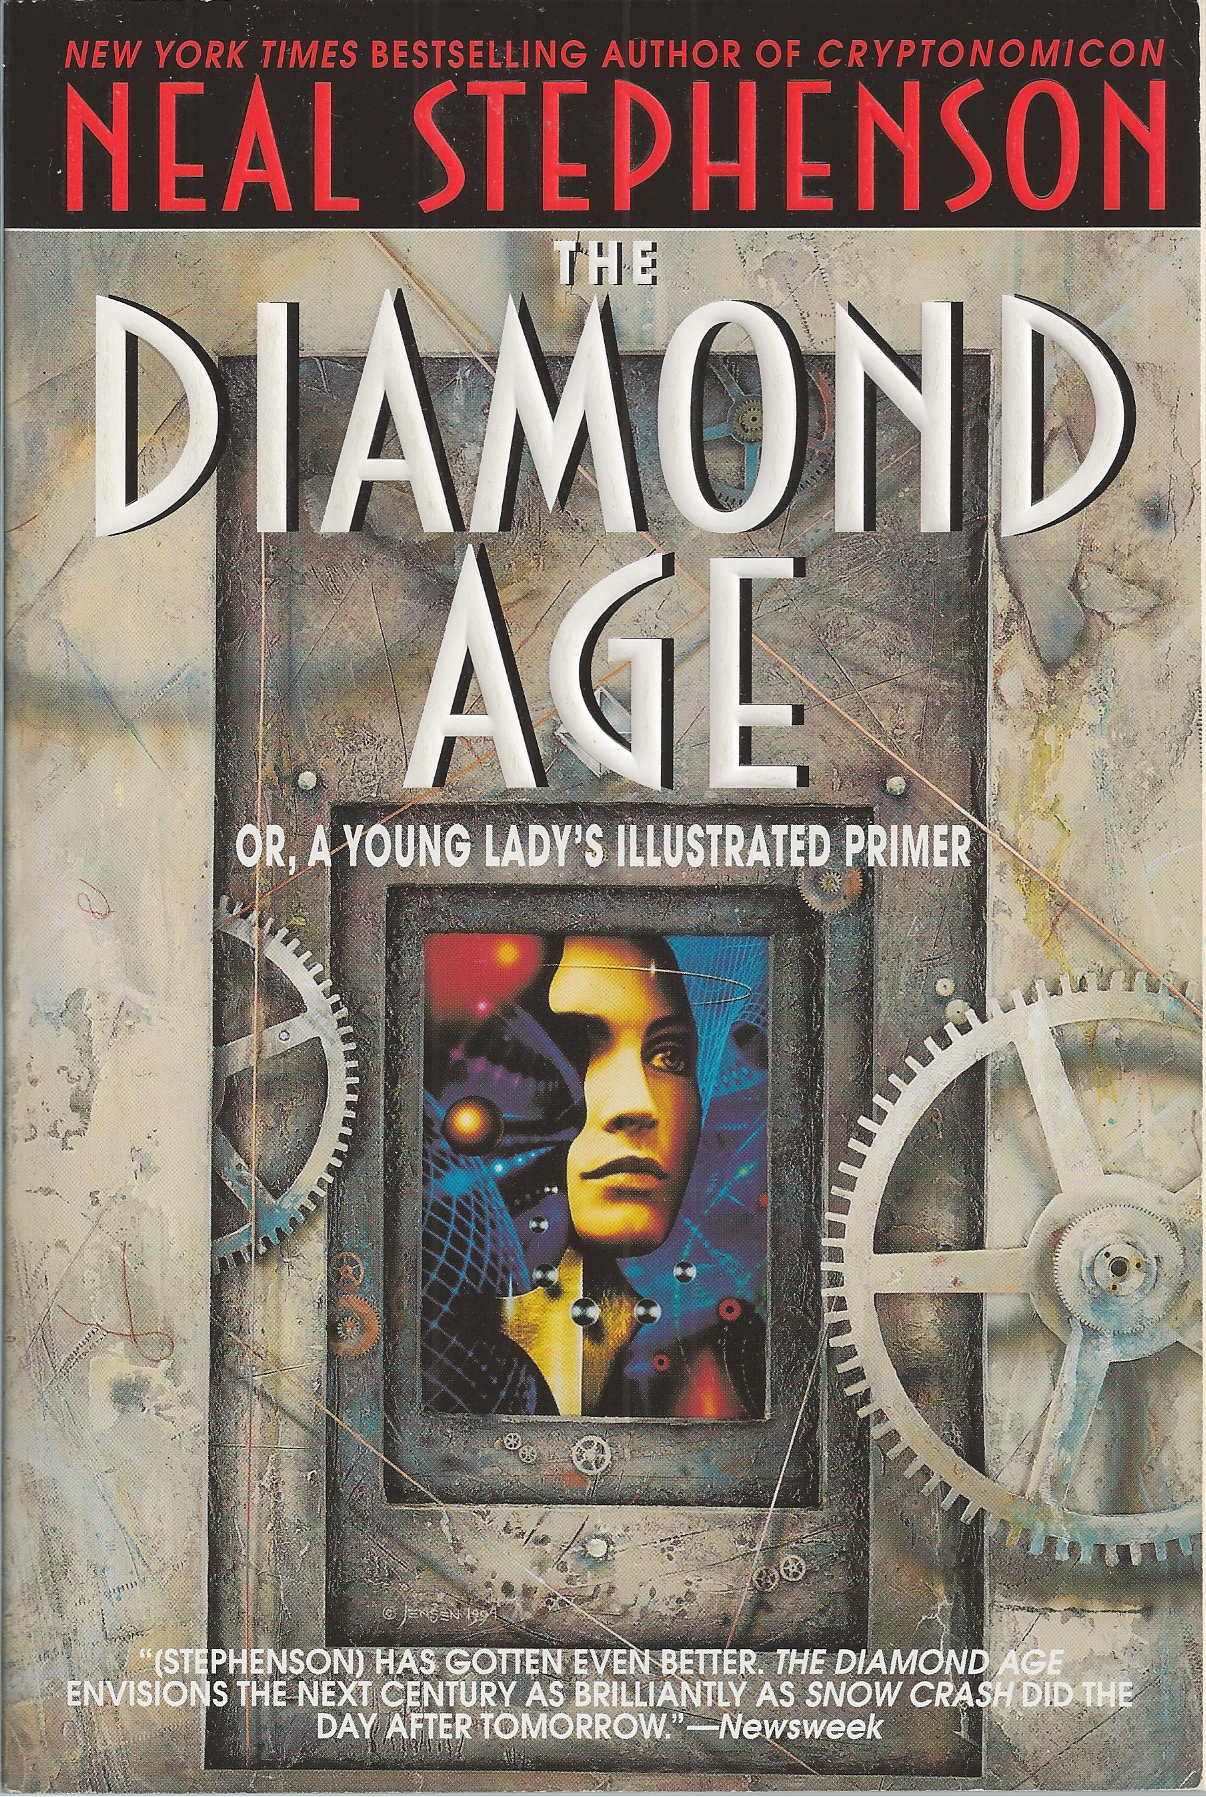 STEPHENSON, NEAL - Diamond Age, the or, a Young Lady's Illustrated Primer